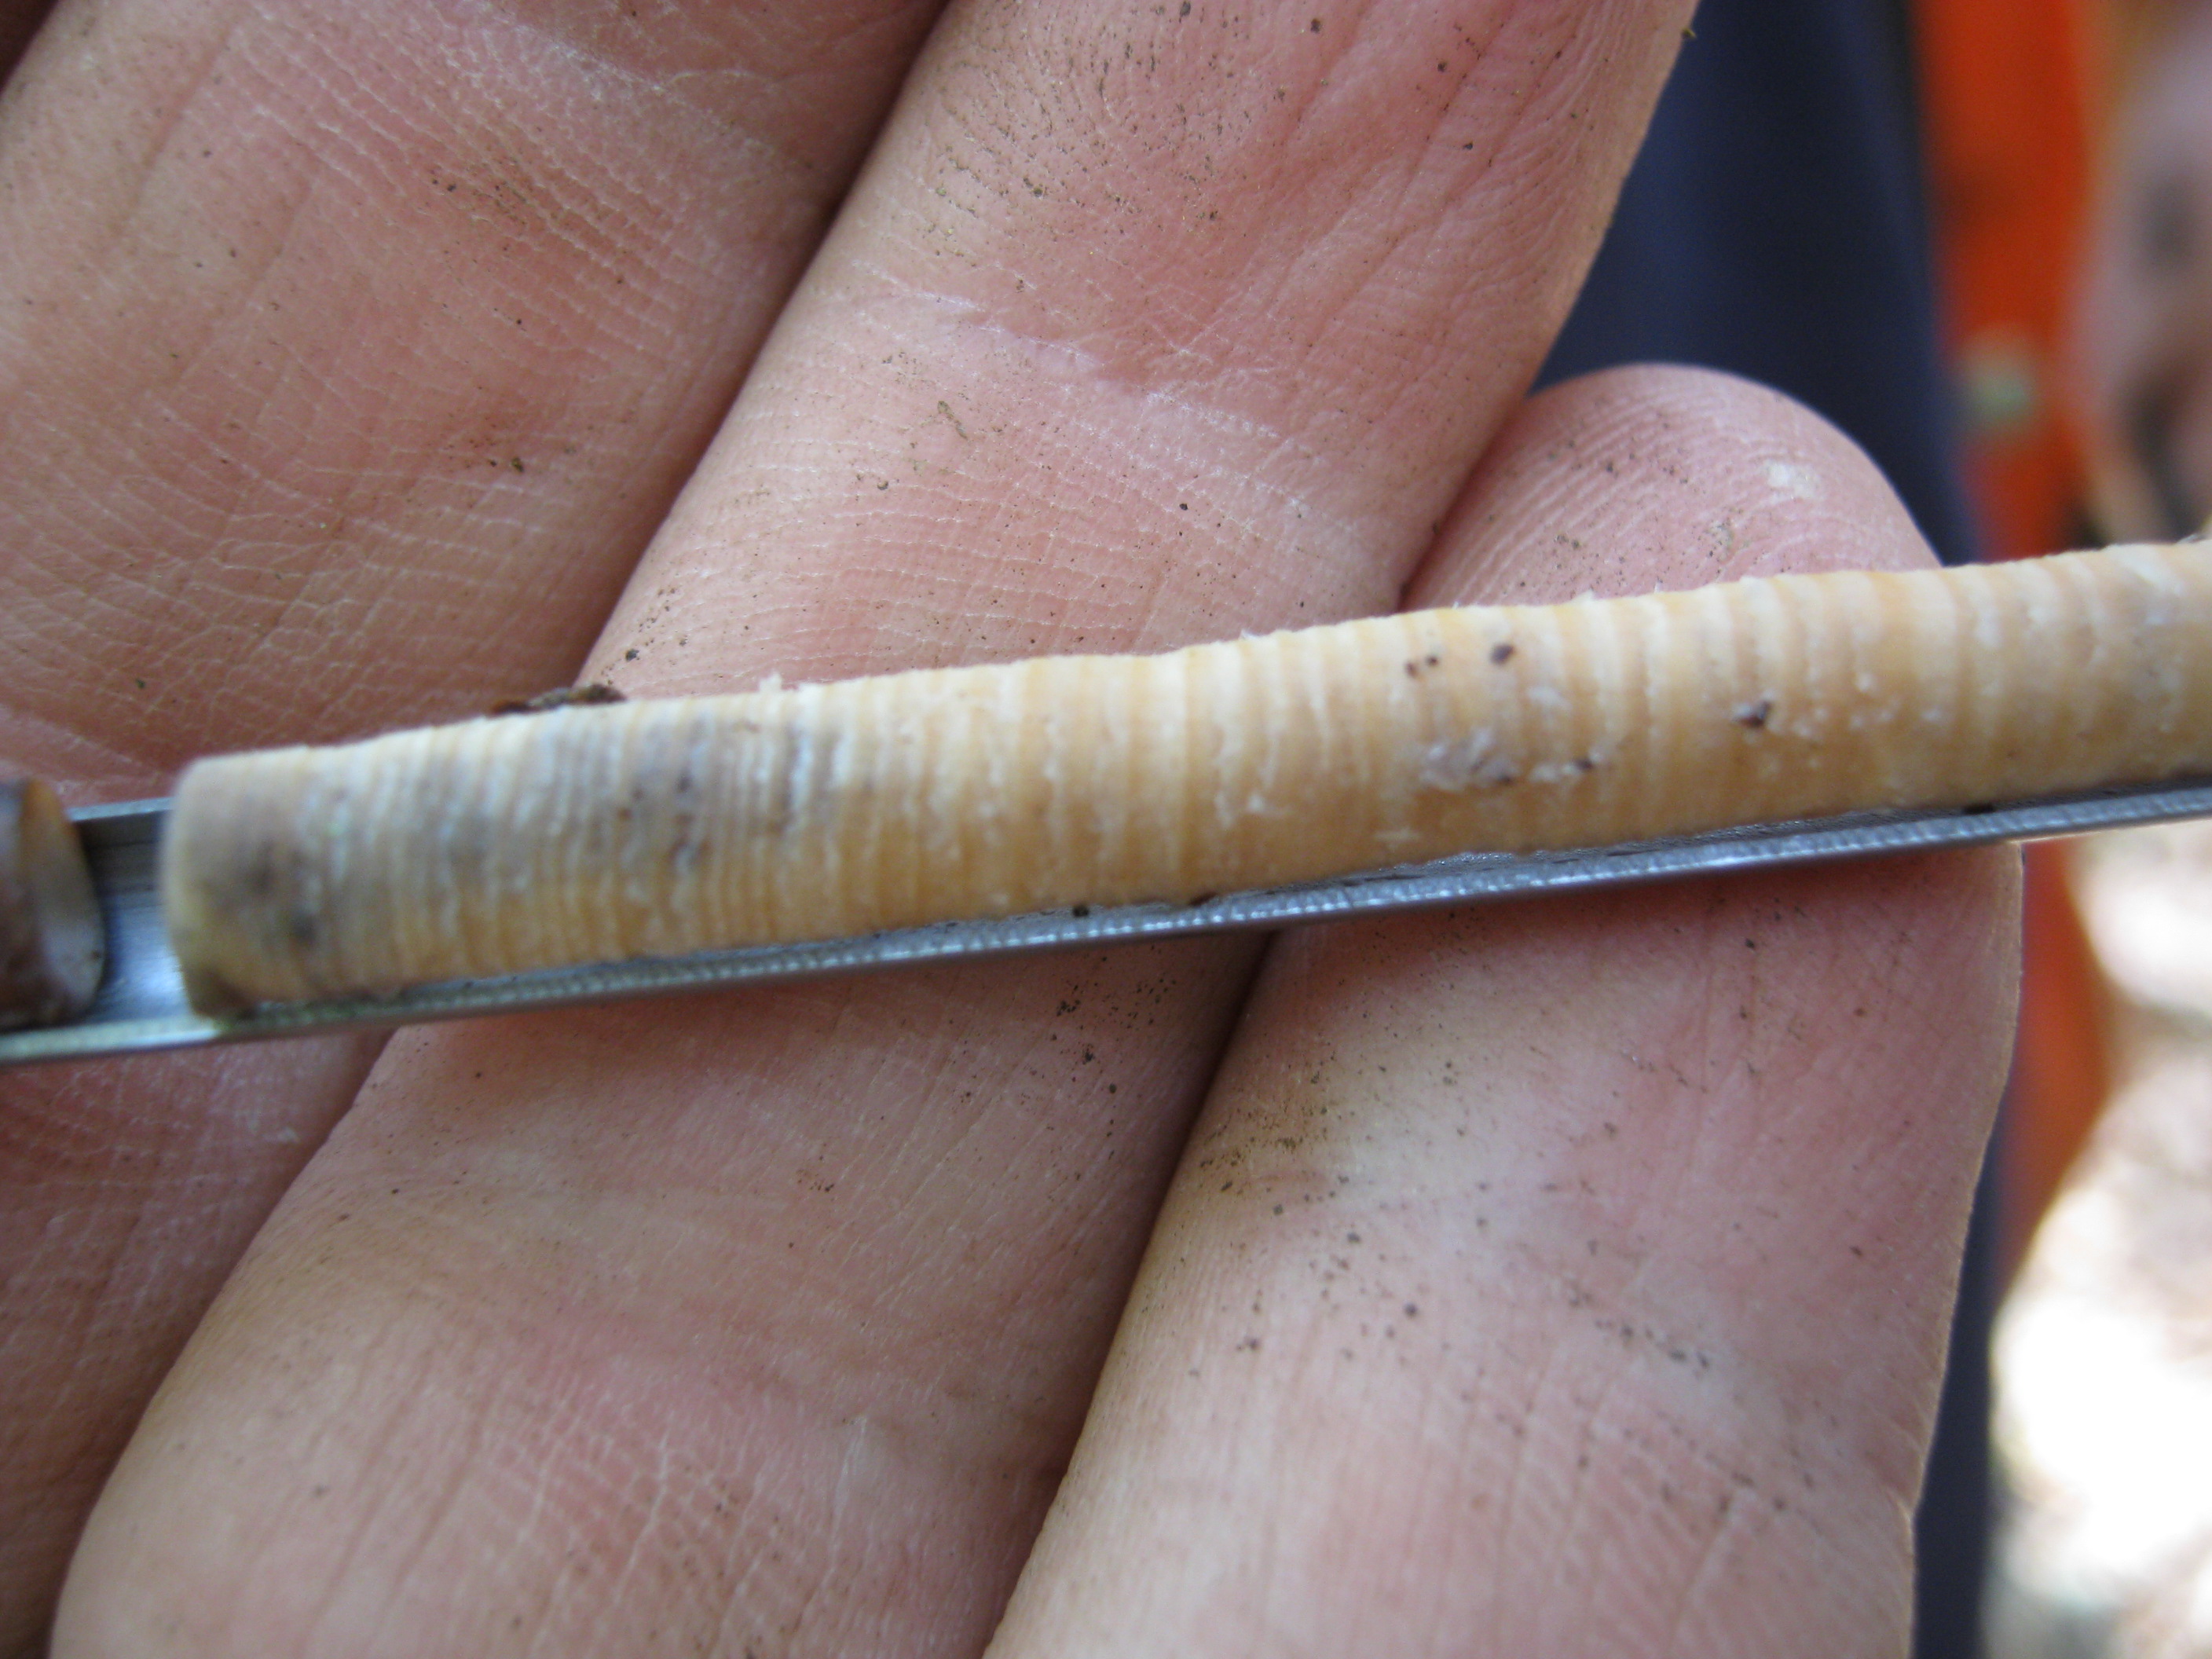 A small tree core held in a person’s hand